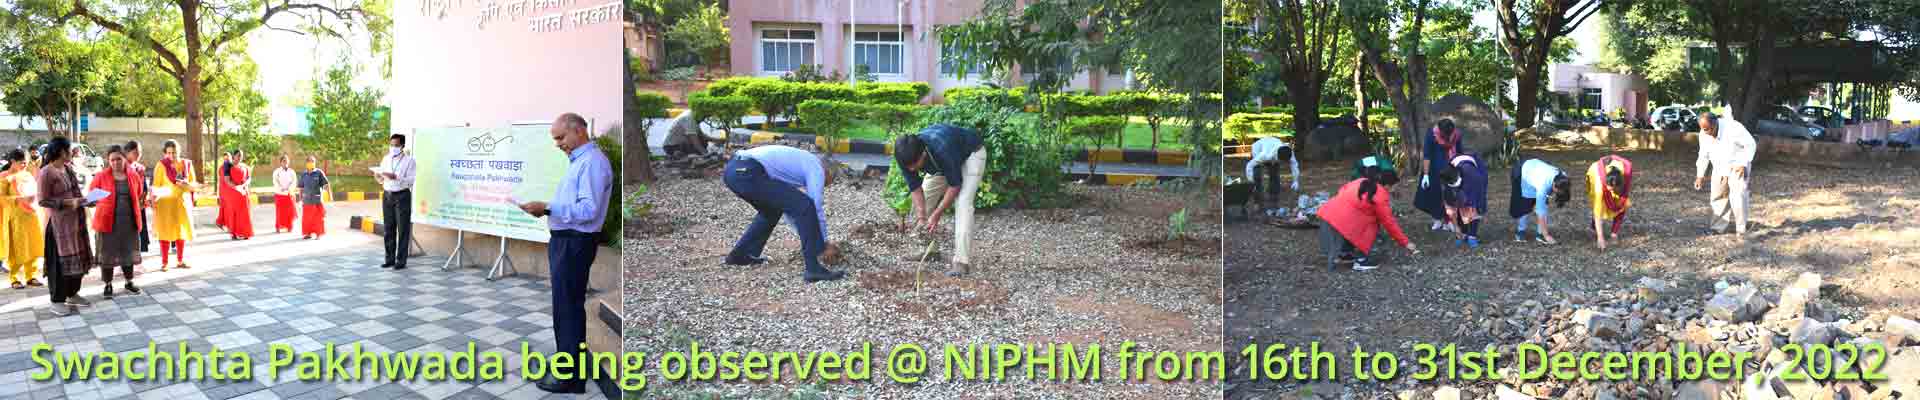 Swachhta Pakhwada being observed @ NIPHM from 16th to 31st December, 2022